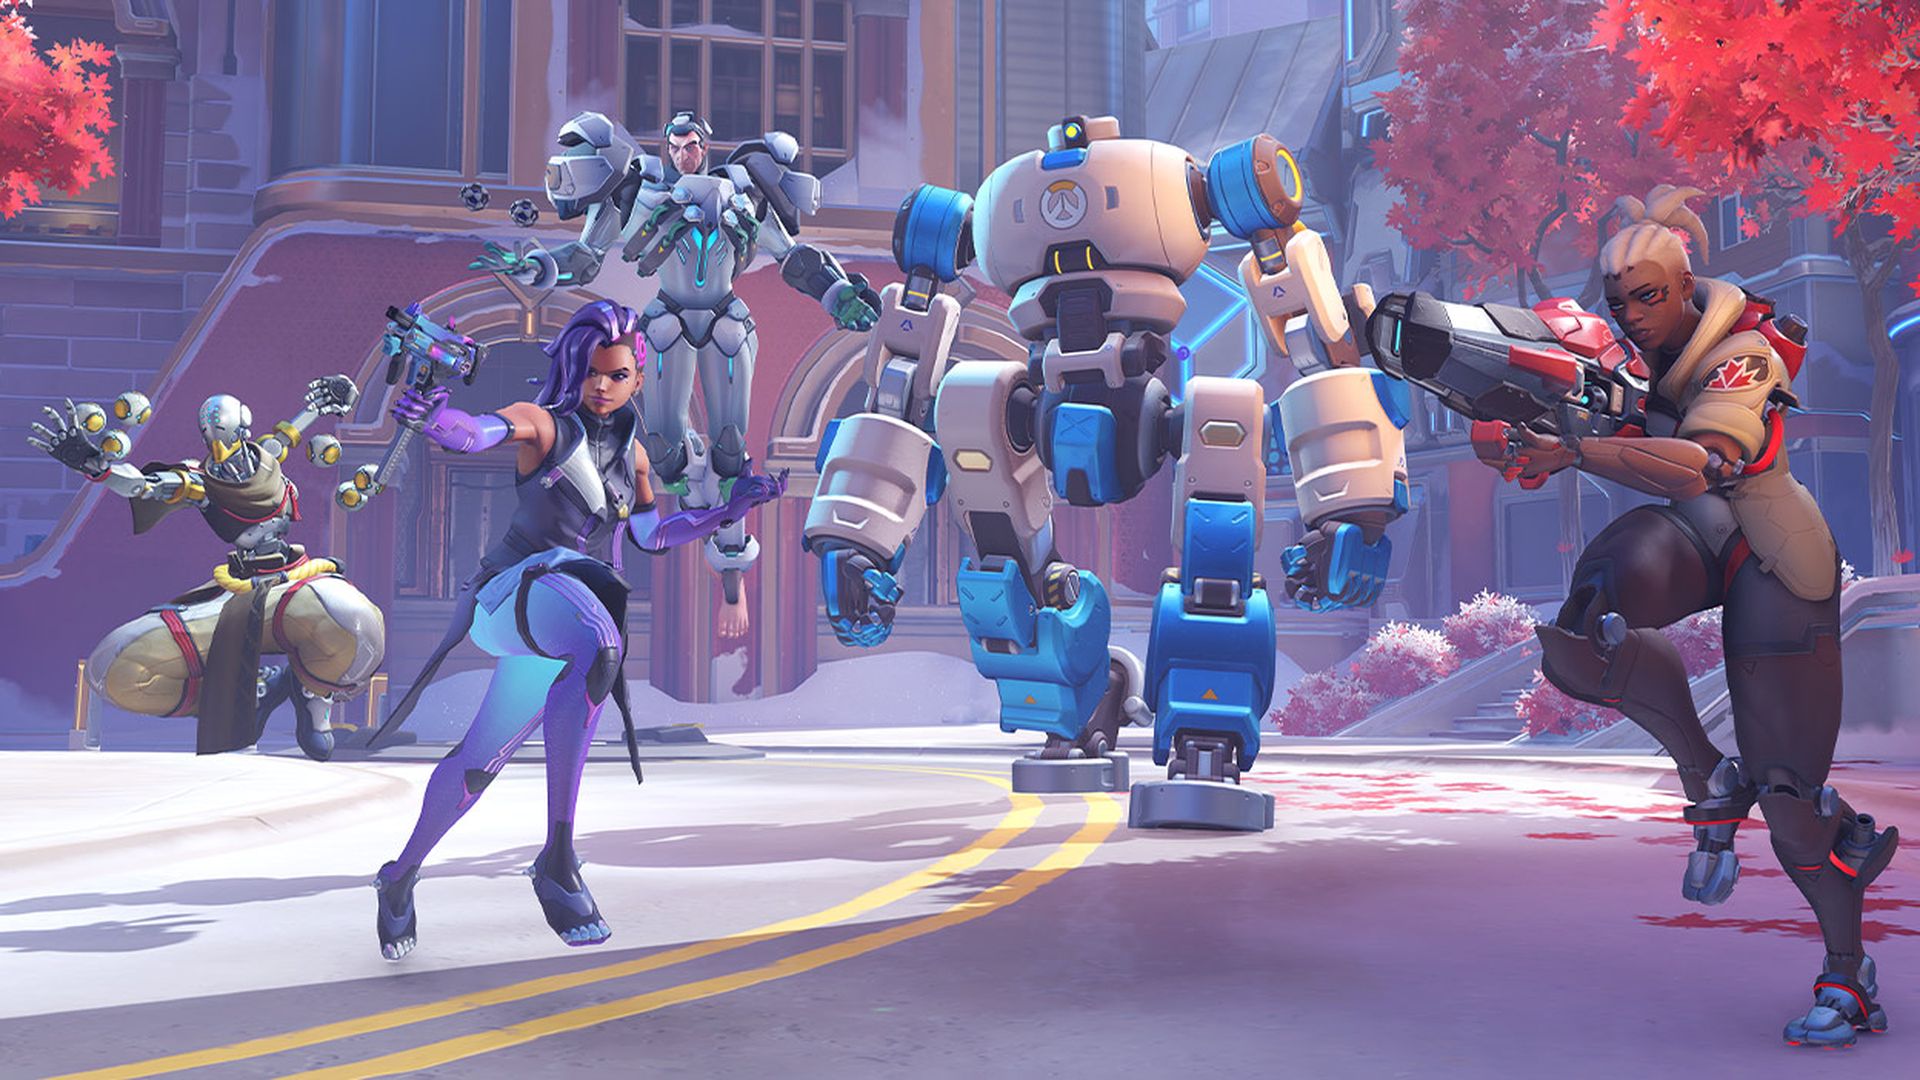 In this article, we are going to be covering how to fix the Overwatch 2 mic not working, so you can enjoy the game and communicate with your team.